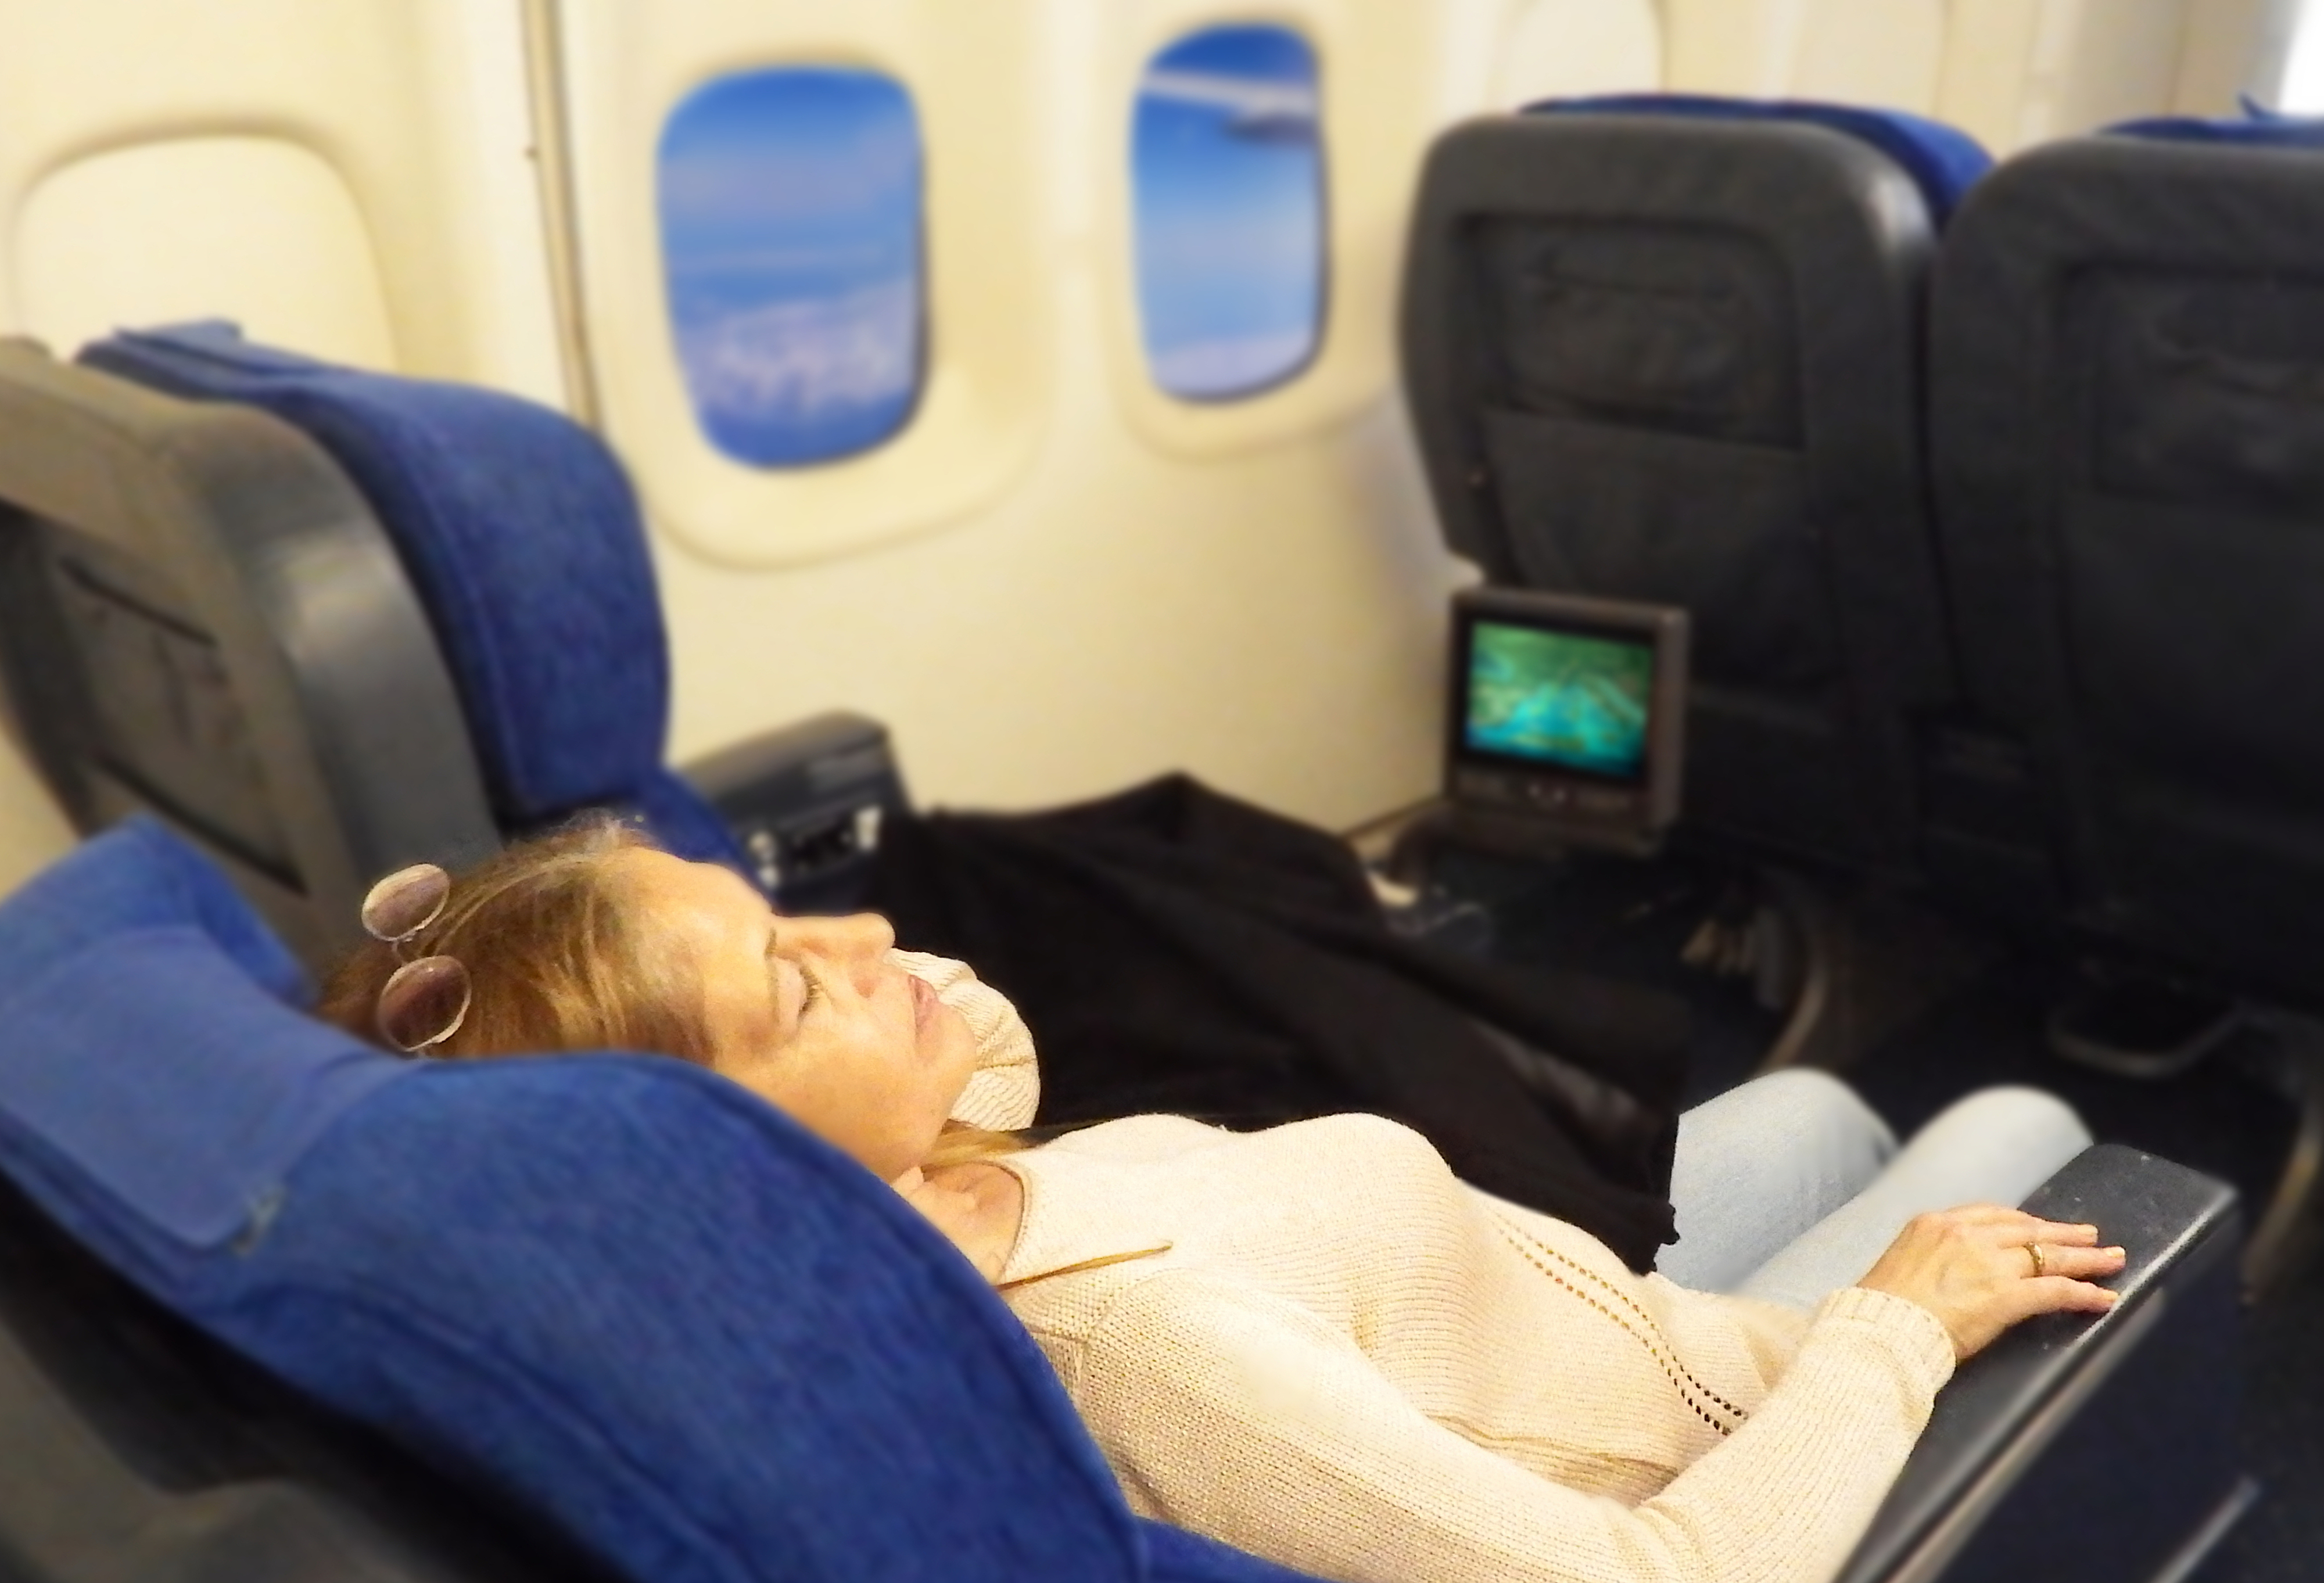 a person reclined on an airplane